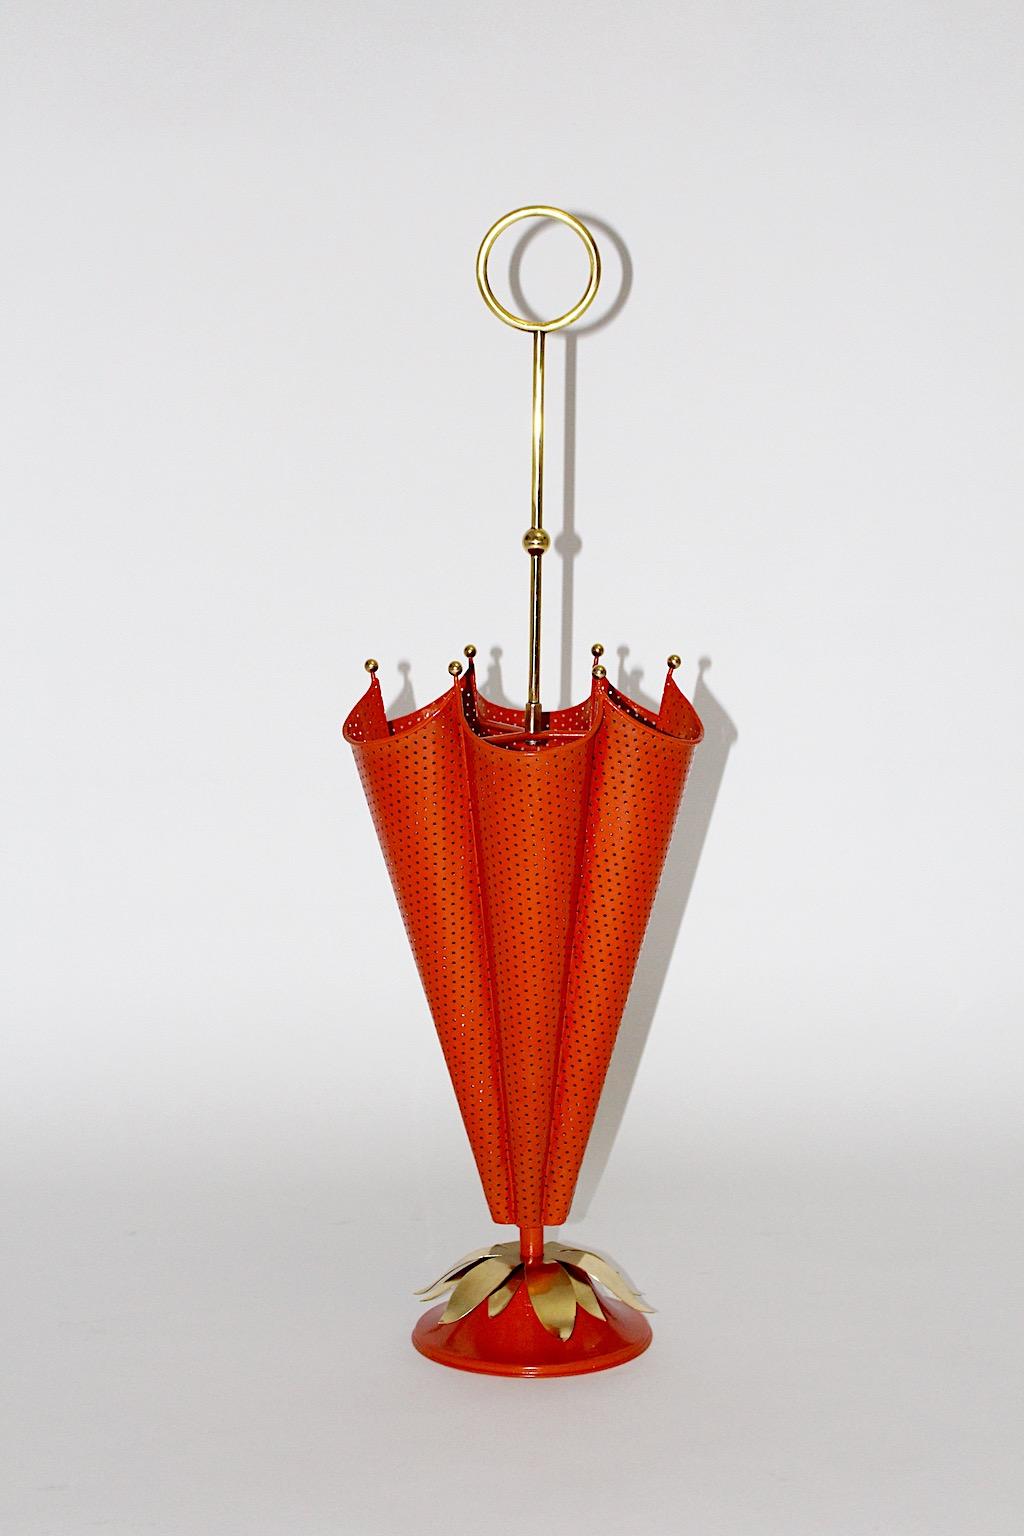 Mid-Century Modern vintage red umbrella stand from perforated metal in orange color tone with brass details attributed to Mathieu Matégot, France, 1950s.
An amazing and beautiful umbrella stand from perforated metal body with lovely brass